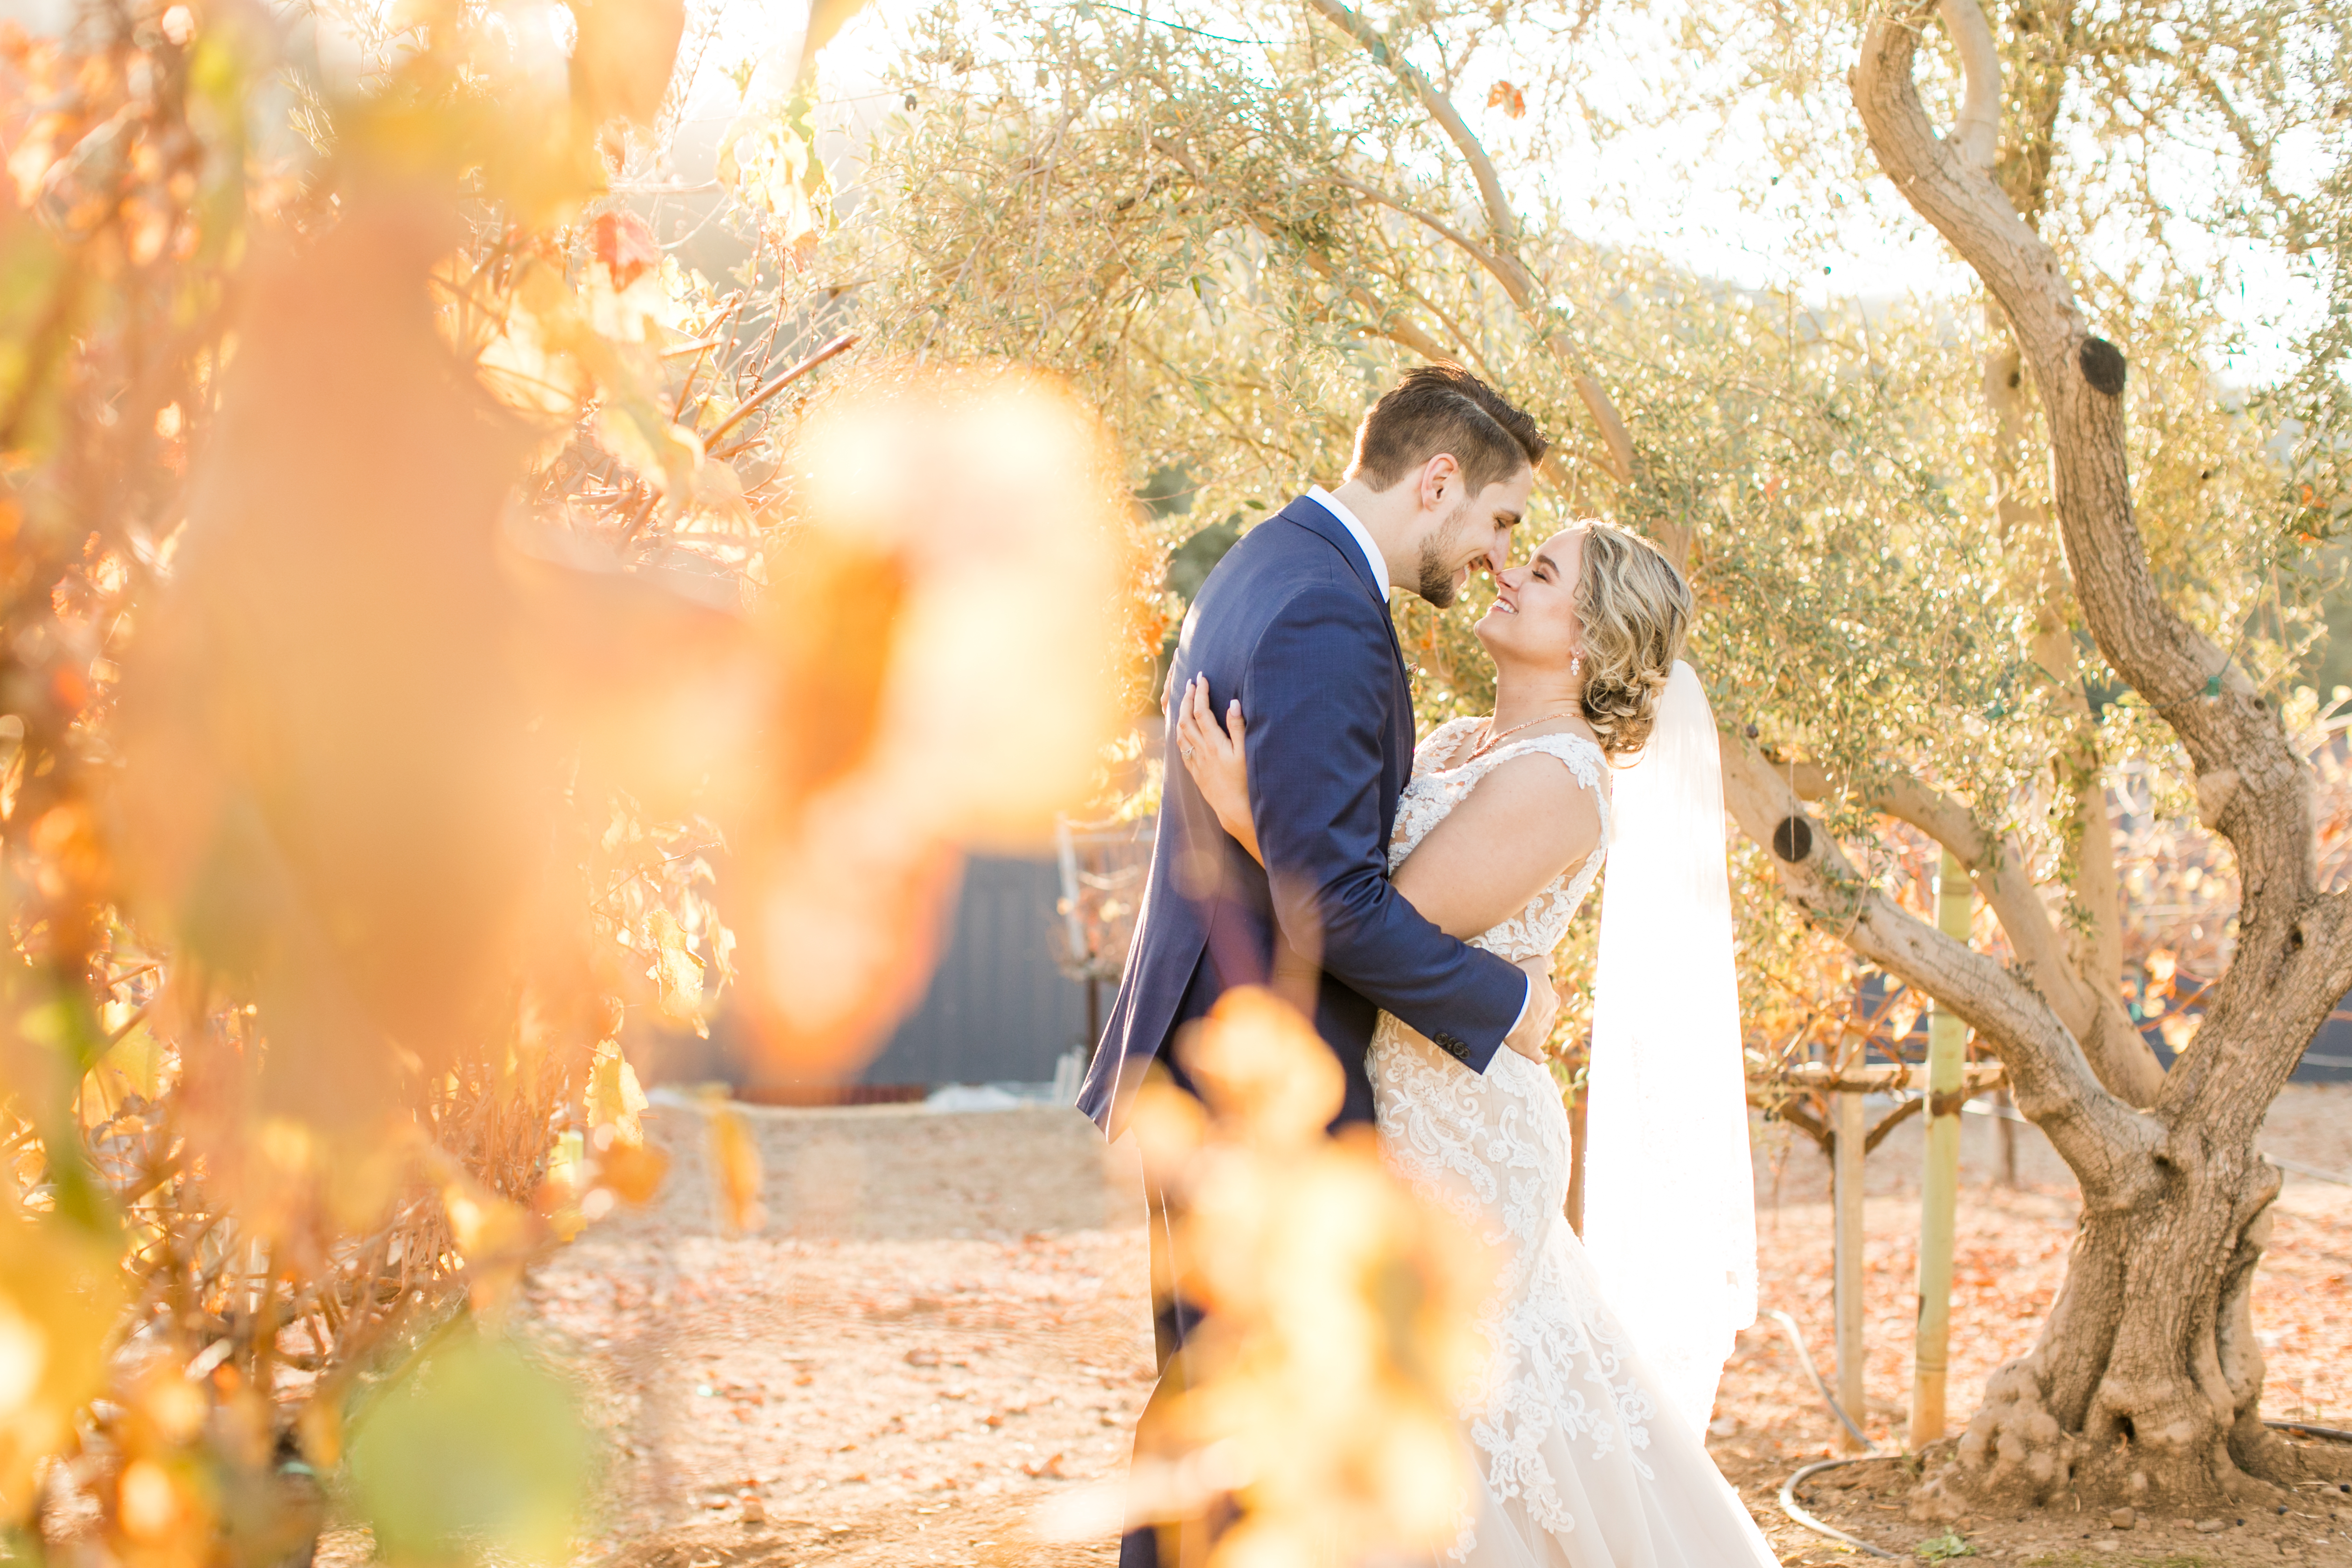 husband and wife in wedding suit and wedding dress during golden hour - couple facing each other in loving embrace with noses touching and smiling at each other